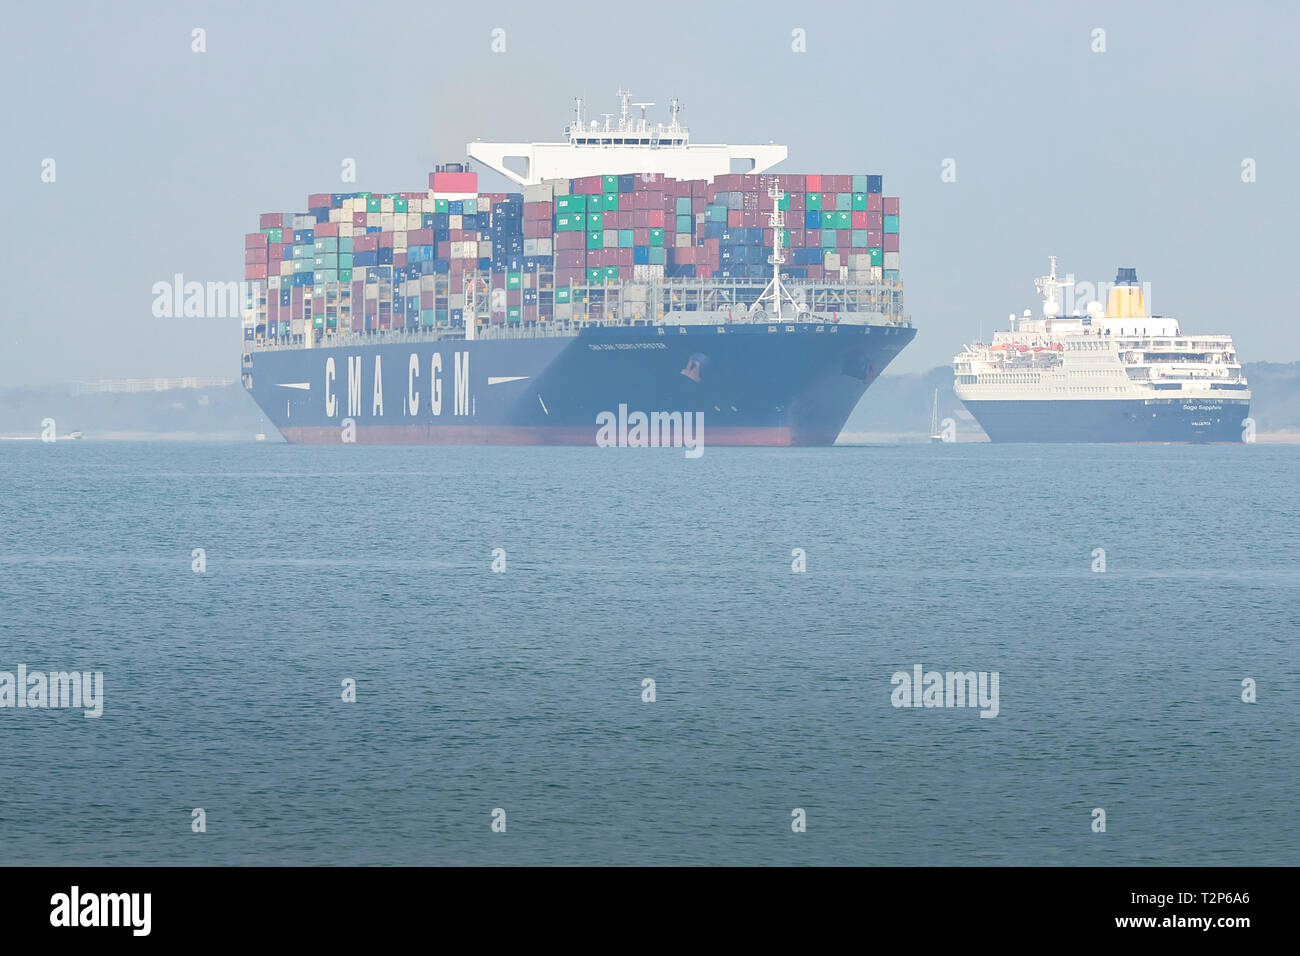 The Container Ship CMA CGM GEORG FORSTER, Leaving The Port Of Southampton, The SAGA SAPPHIRE Passing To Port. 28 March 2019. Stock Photo